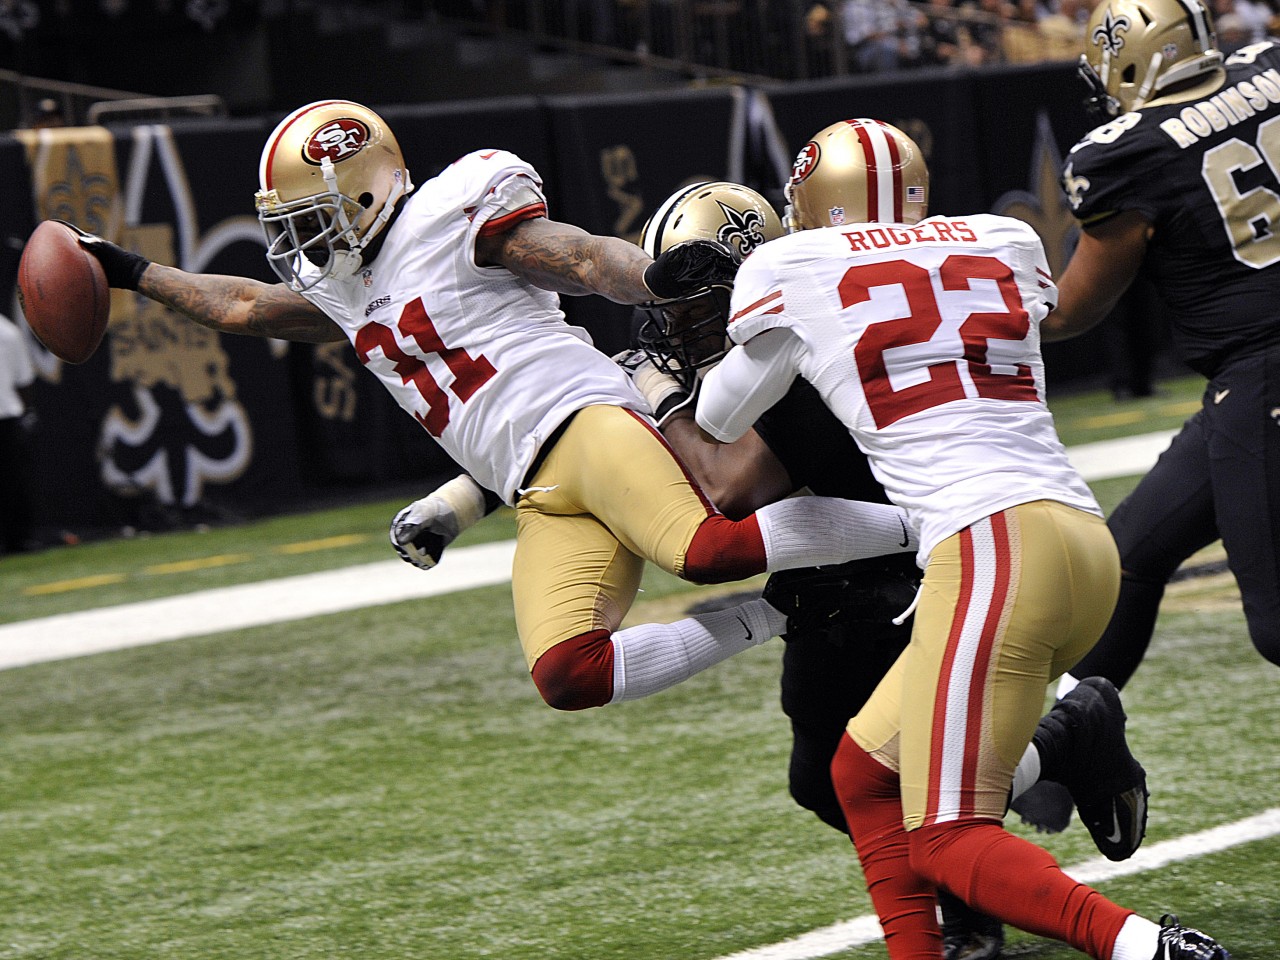 San Francisco 49ers strong safety Donte Whitner (31) scores on a touchdown run in the second half of an NFL football game against the New Orleans Saints in New Orleans, Sunday, Nov. 25, 2012. (AP Photo/Bill Feig)